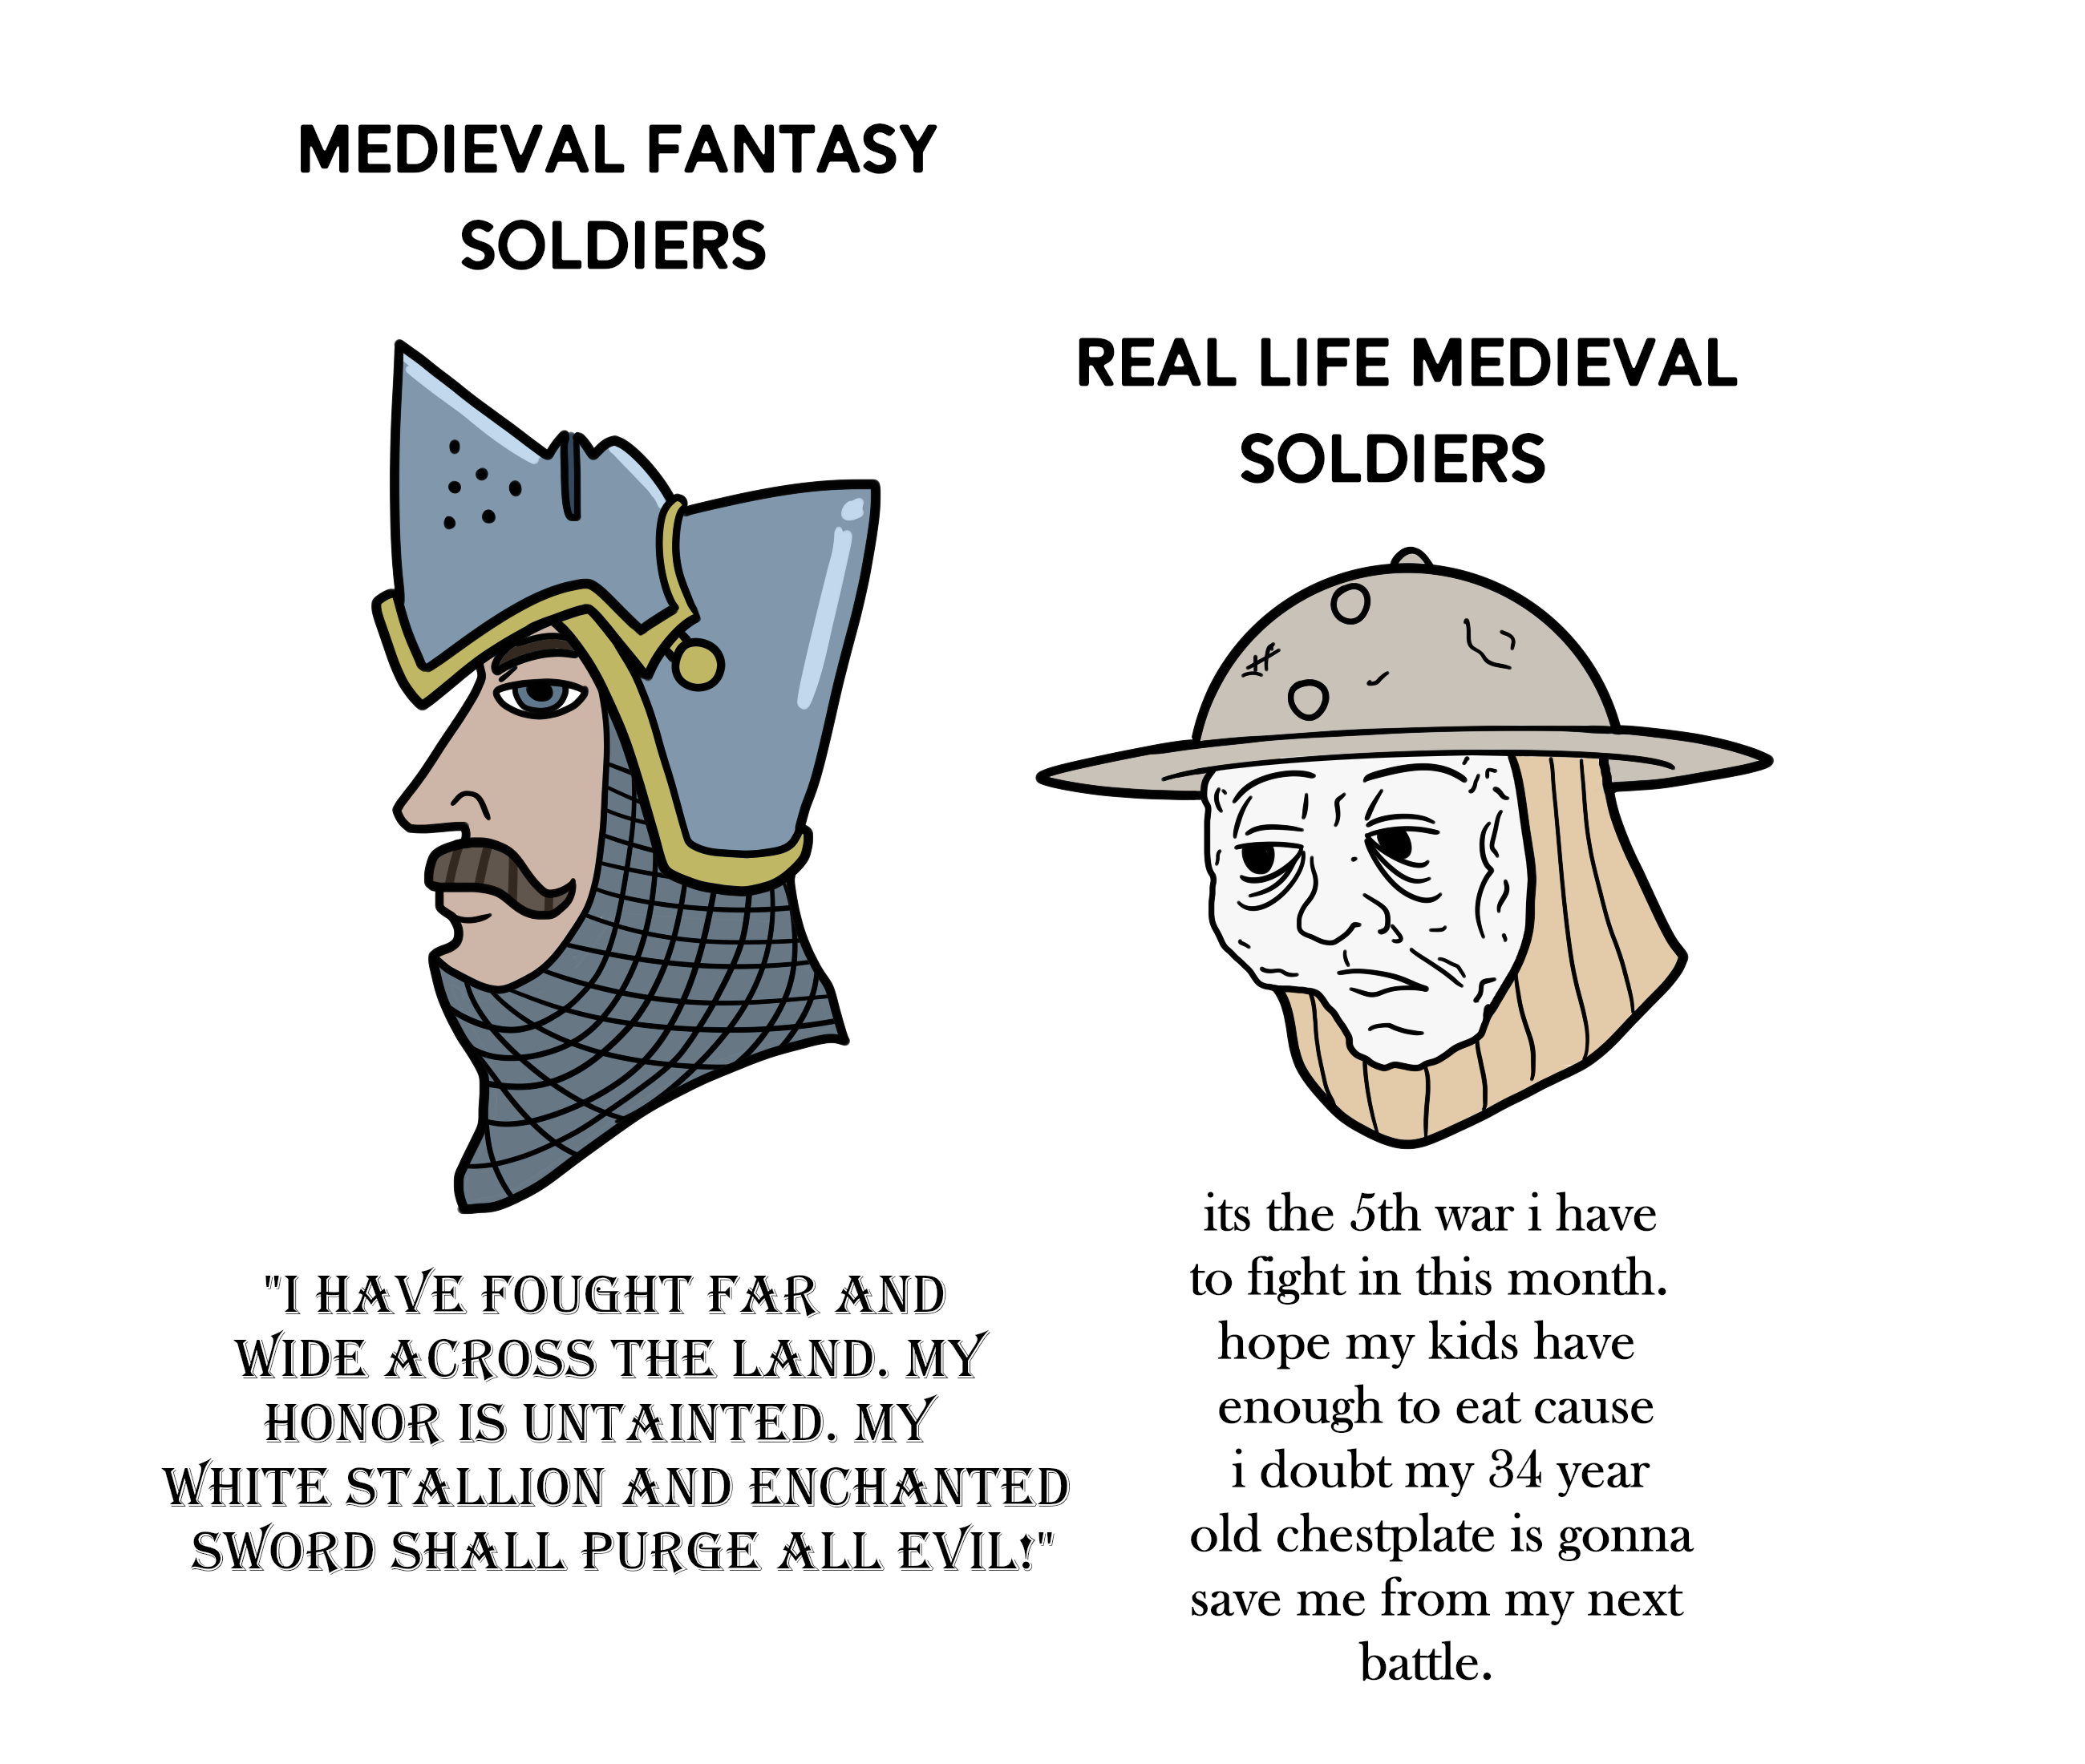 Medieval Fantasy vs Real Life soldiers